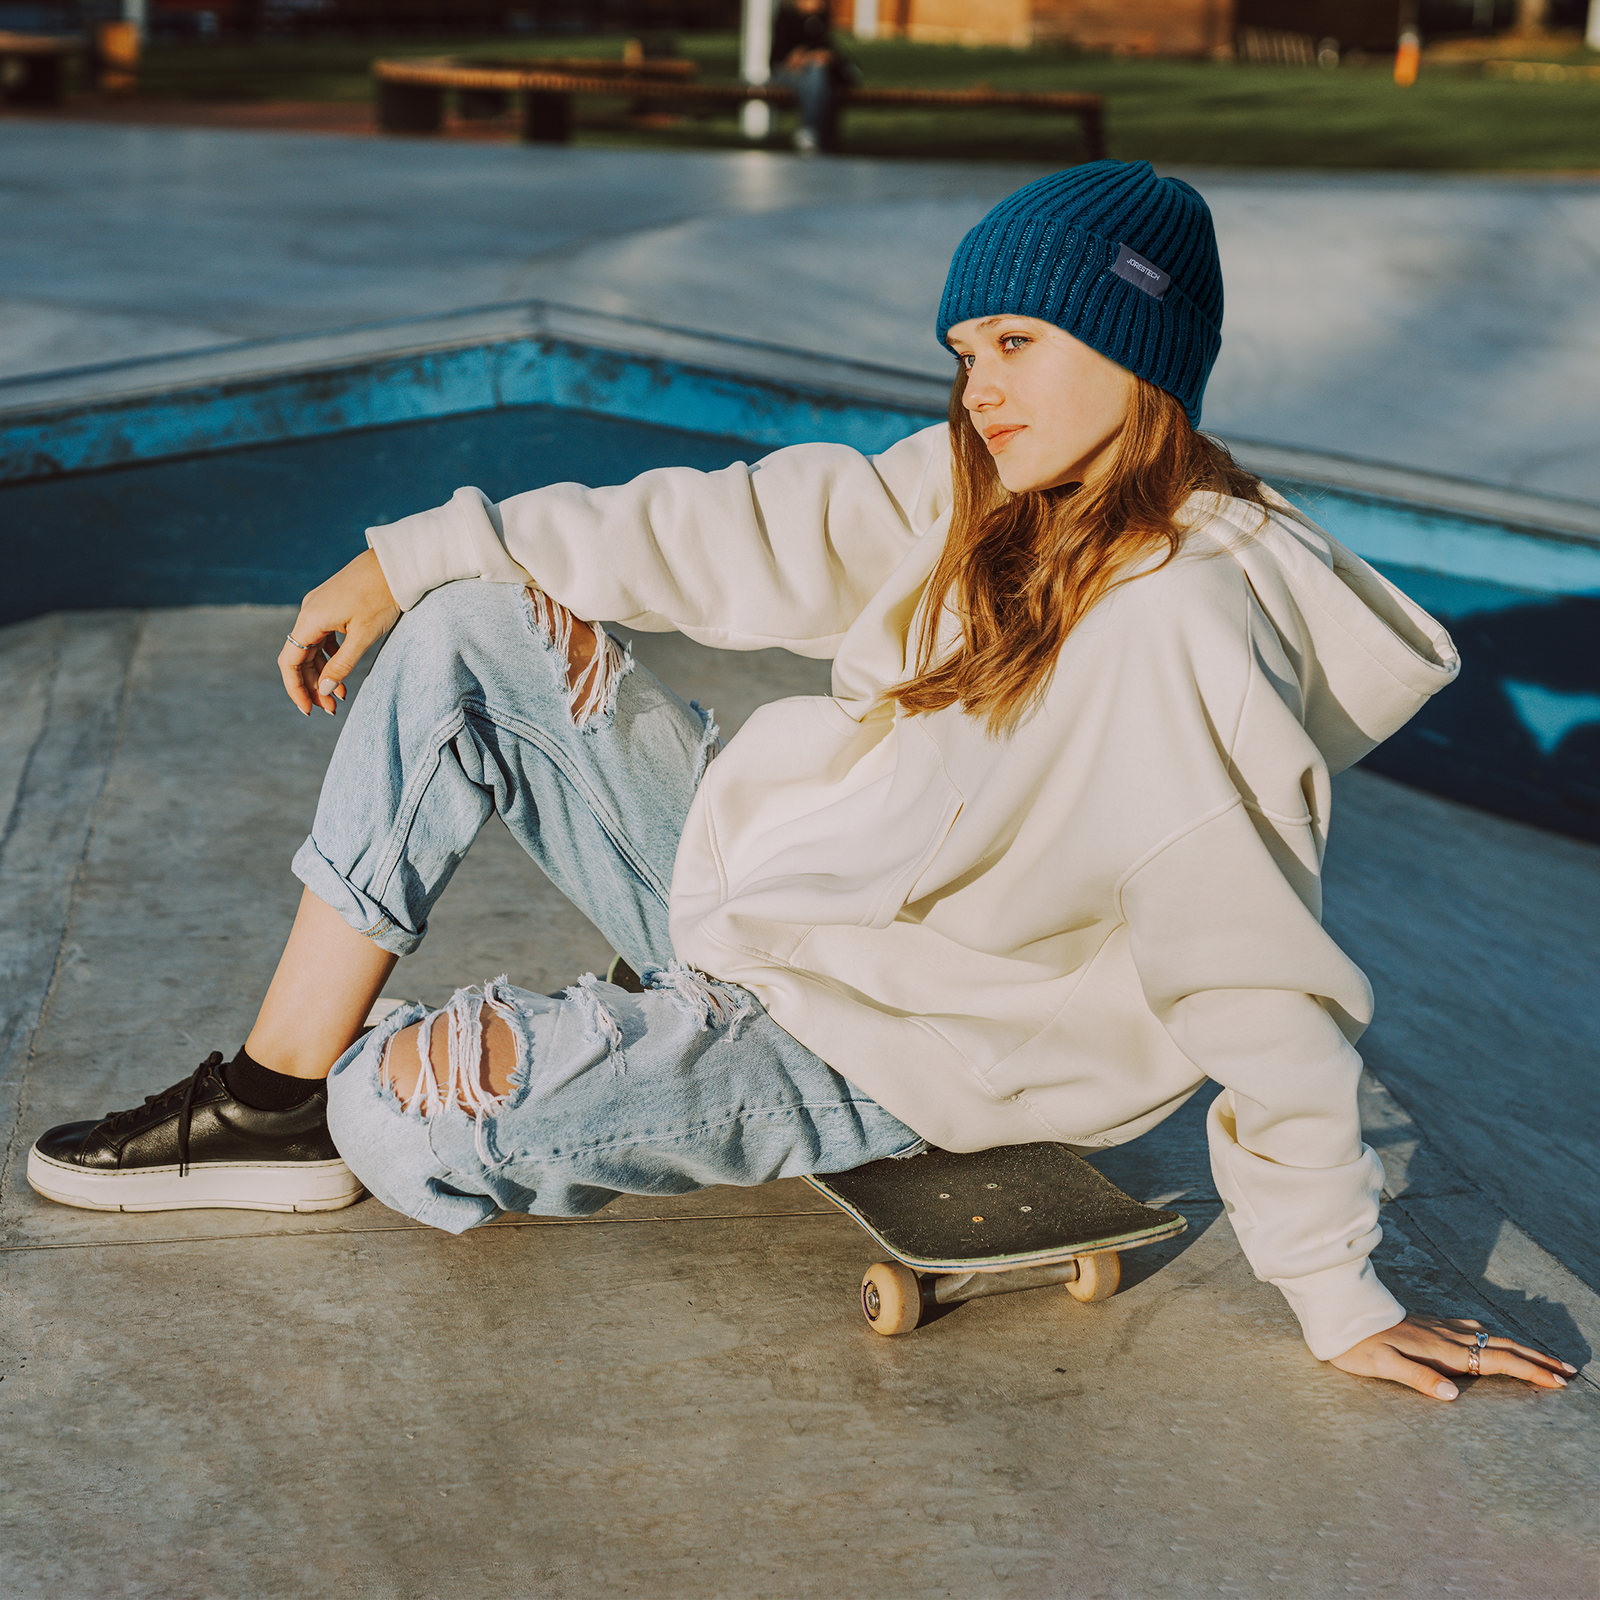 Woman wearing a blue beanie hat with reflective stitching for roller bladding